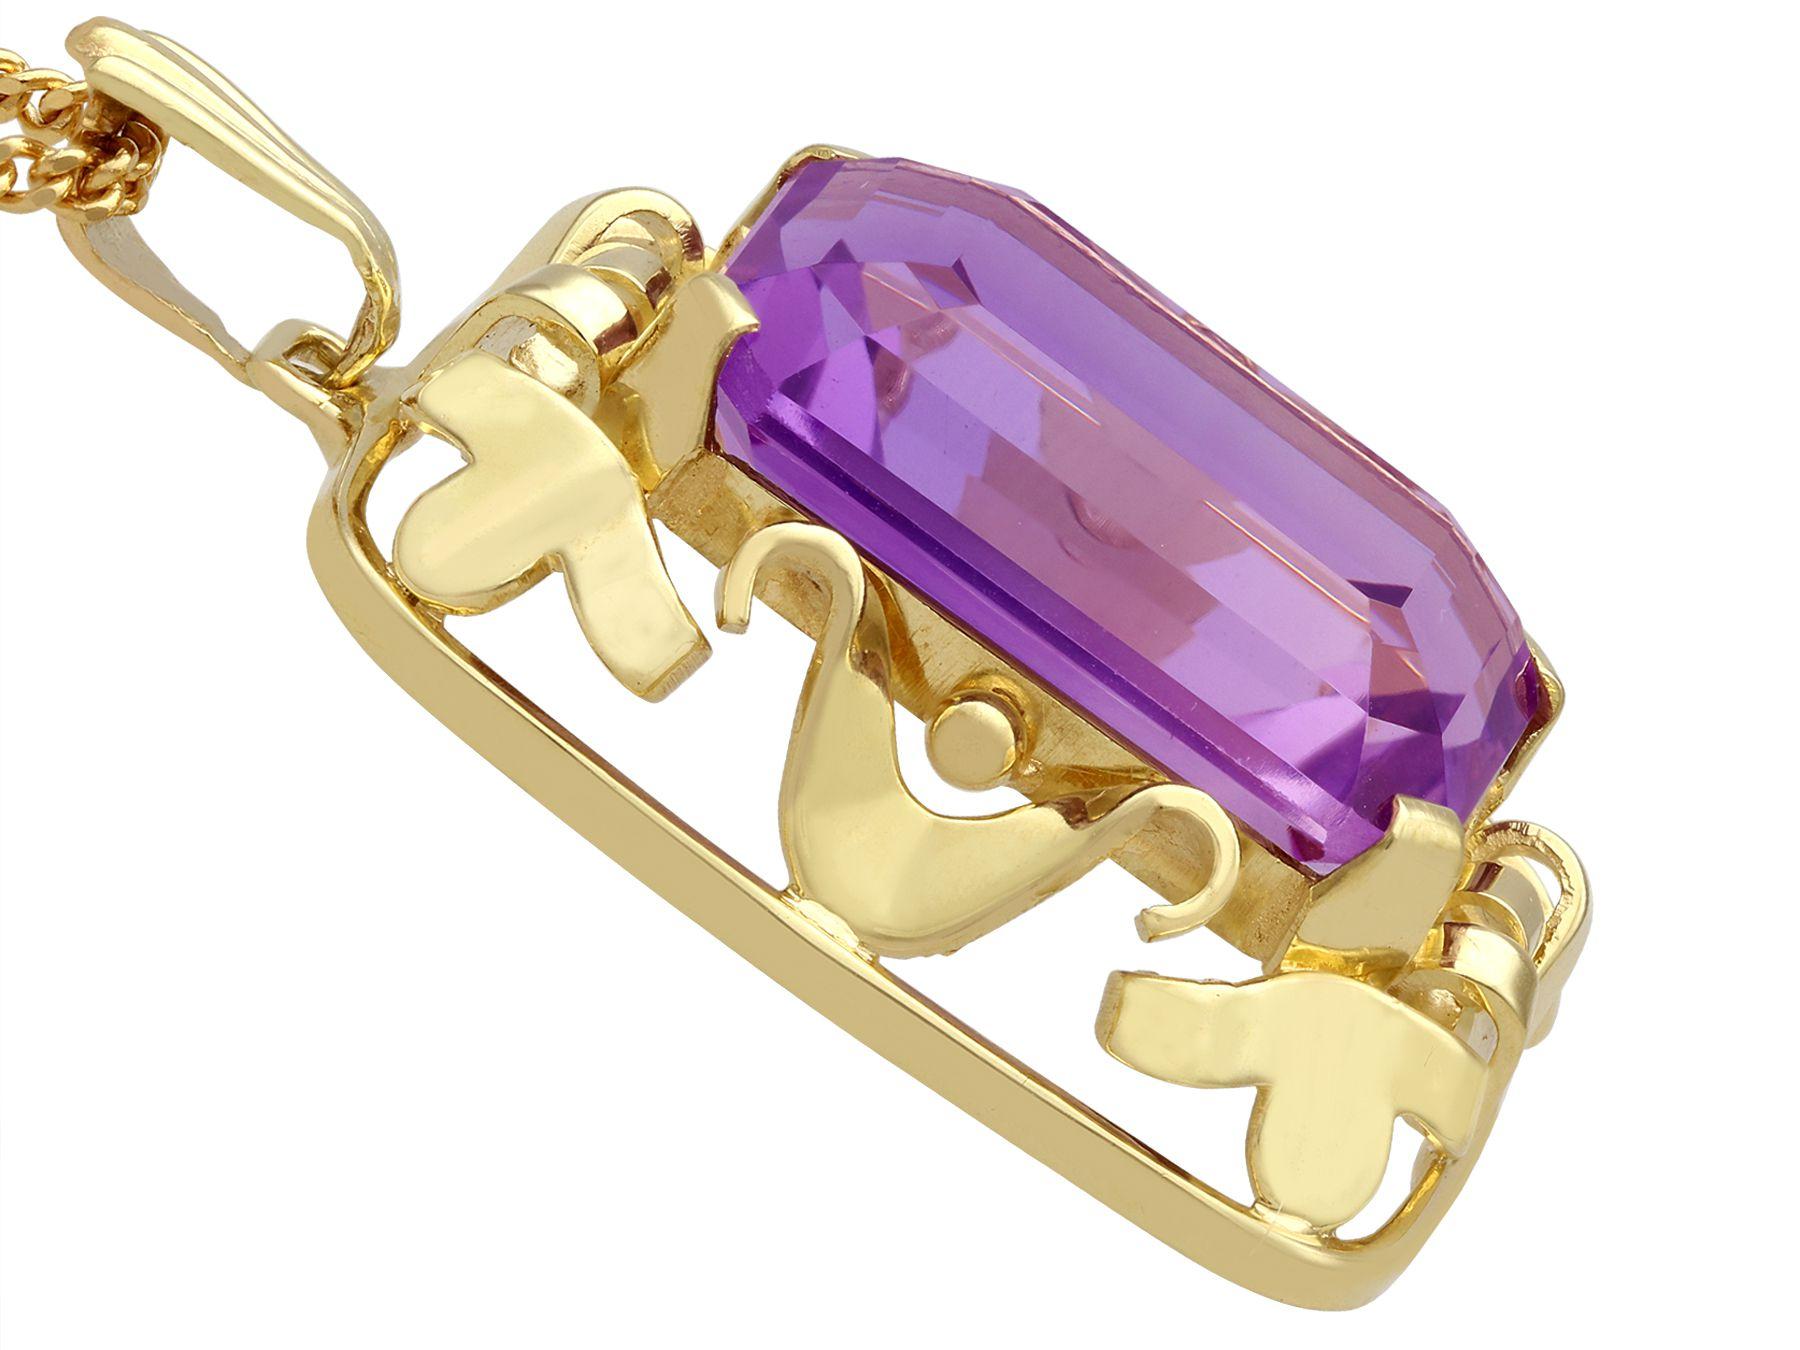 Vintage 1950s 15.41 Carat Amethyst and Yellow Gold Pendant In Excellent Condition For Sale In Jesmond, Newcastle Upon Tyne